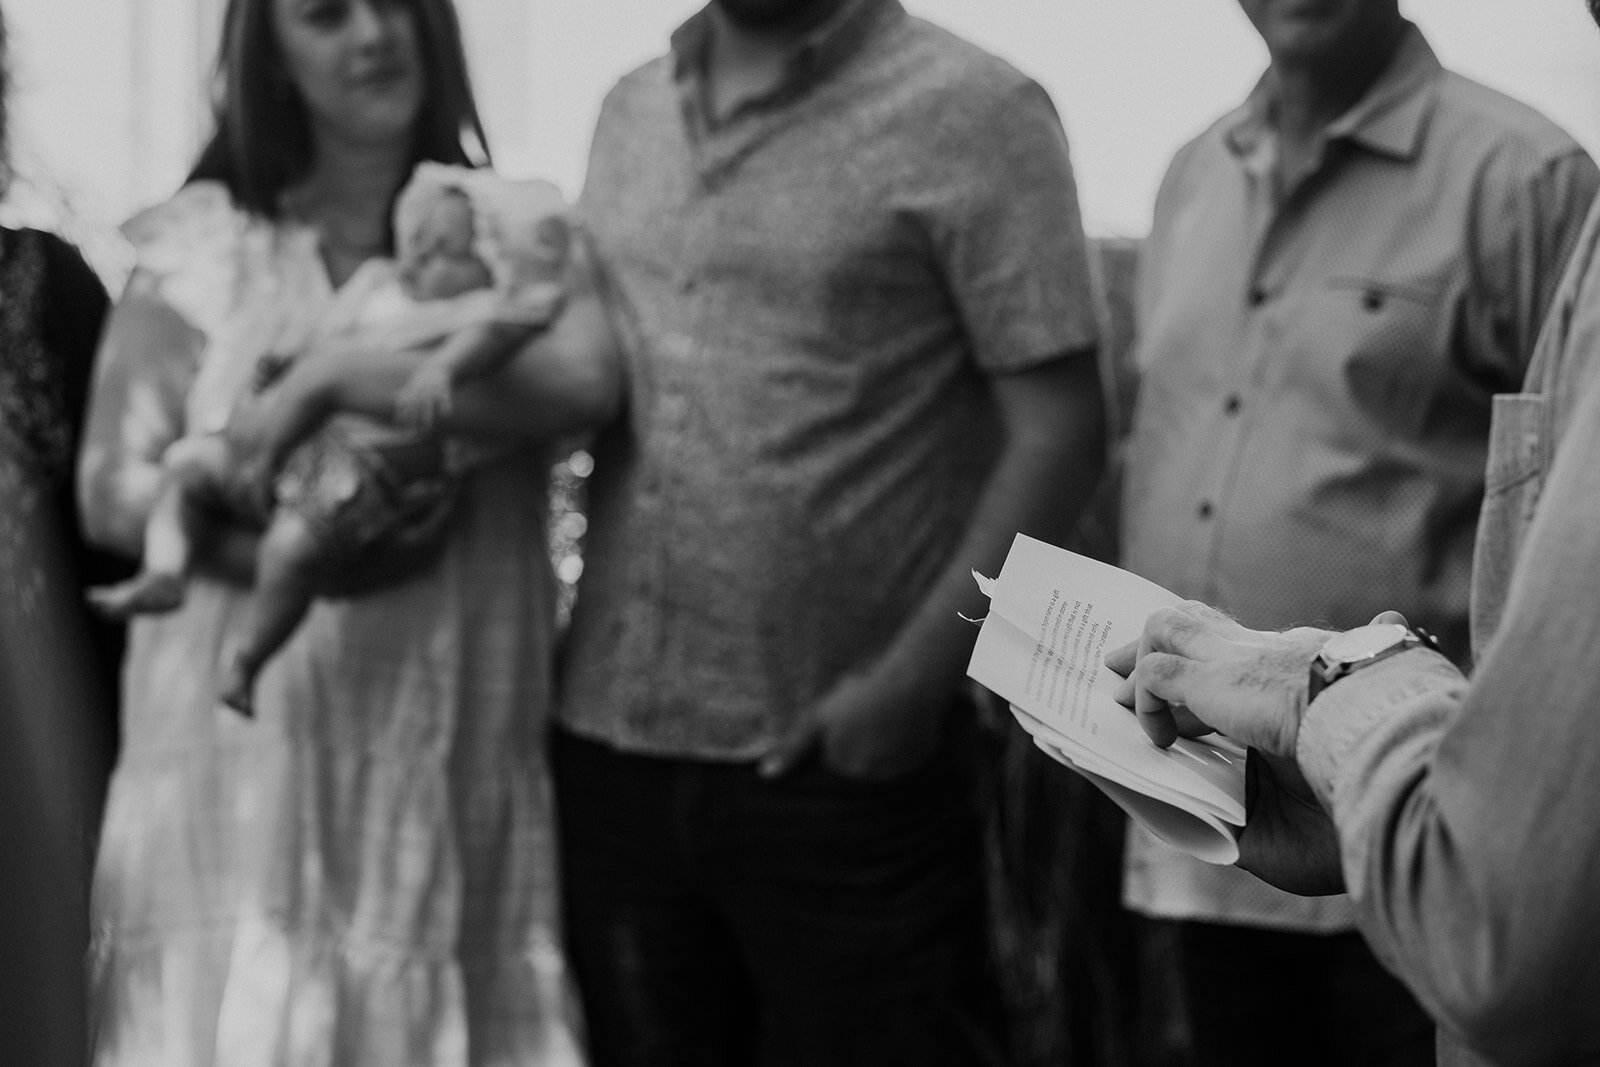 A rabbi continues prayers for the Jewish baby naming ceremony.